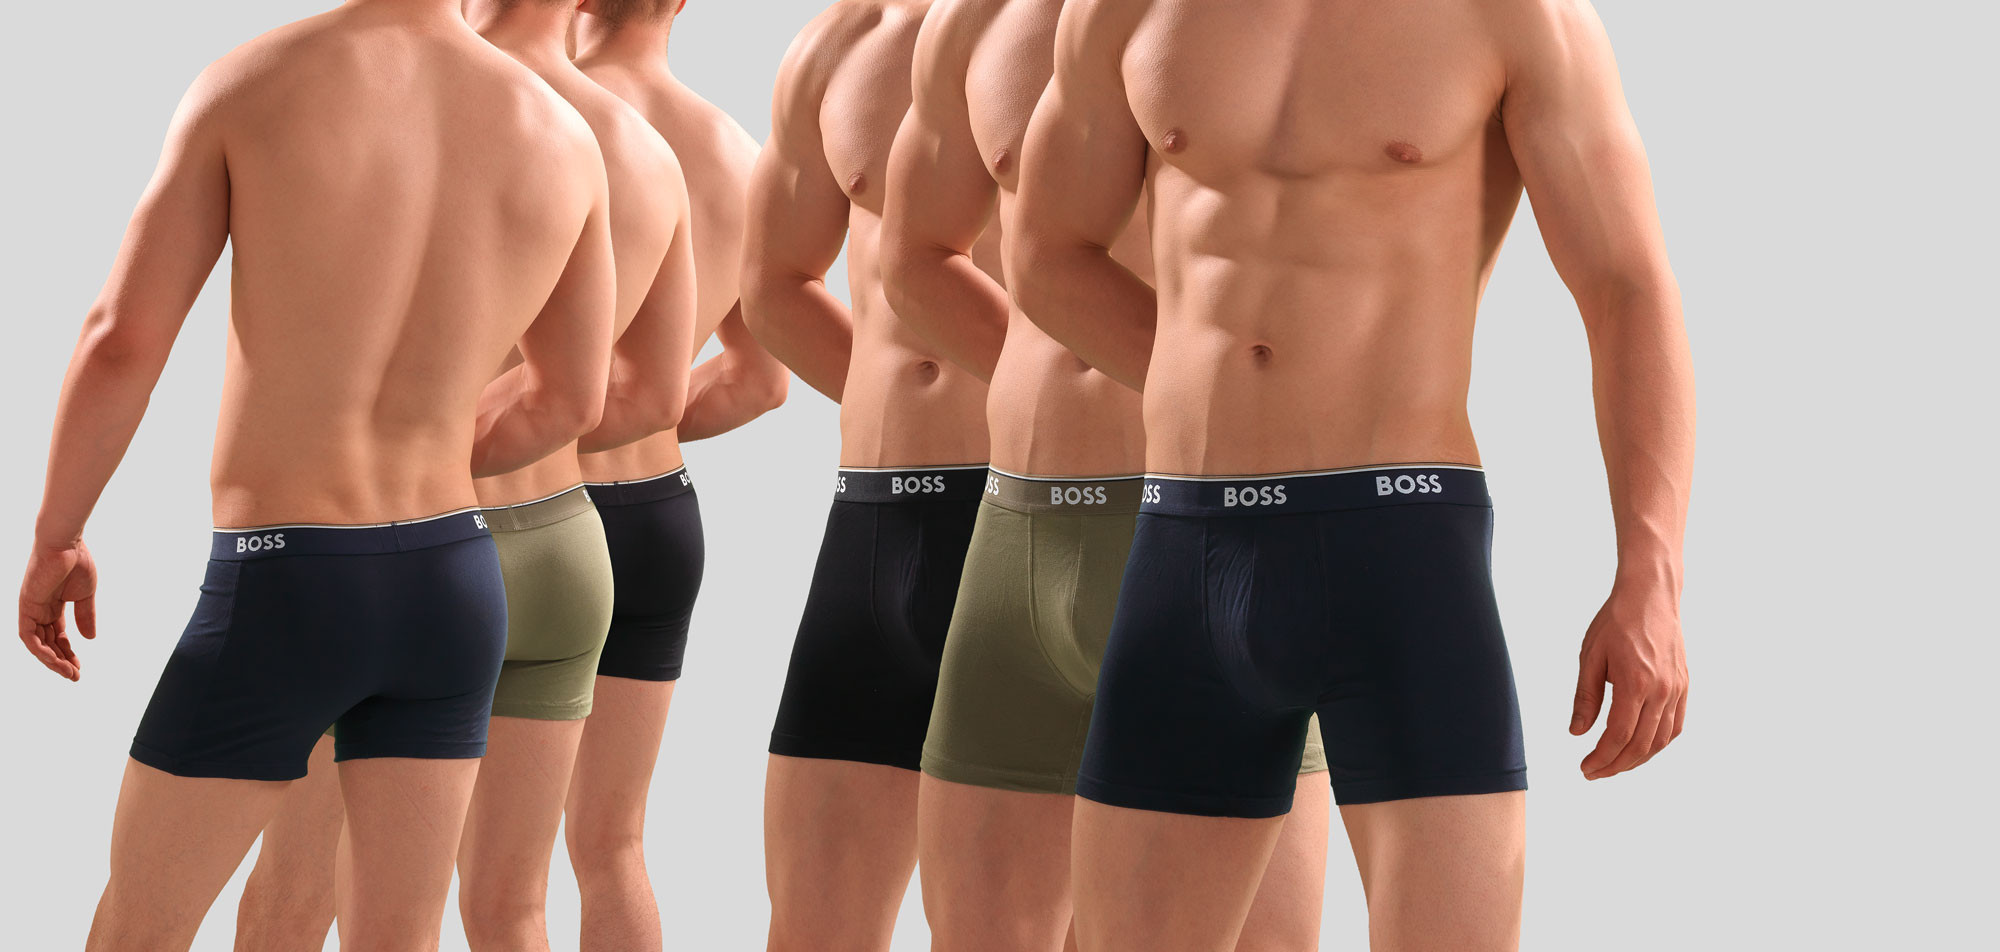 Boss Boxer Brief 3-Pack 828 Power,